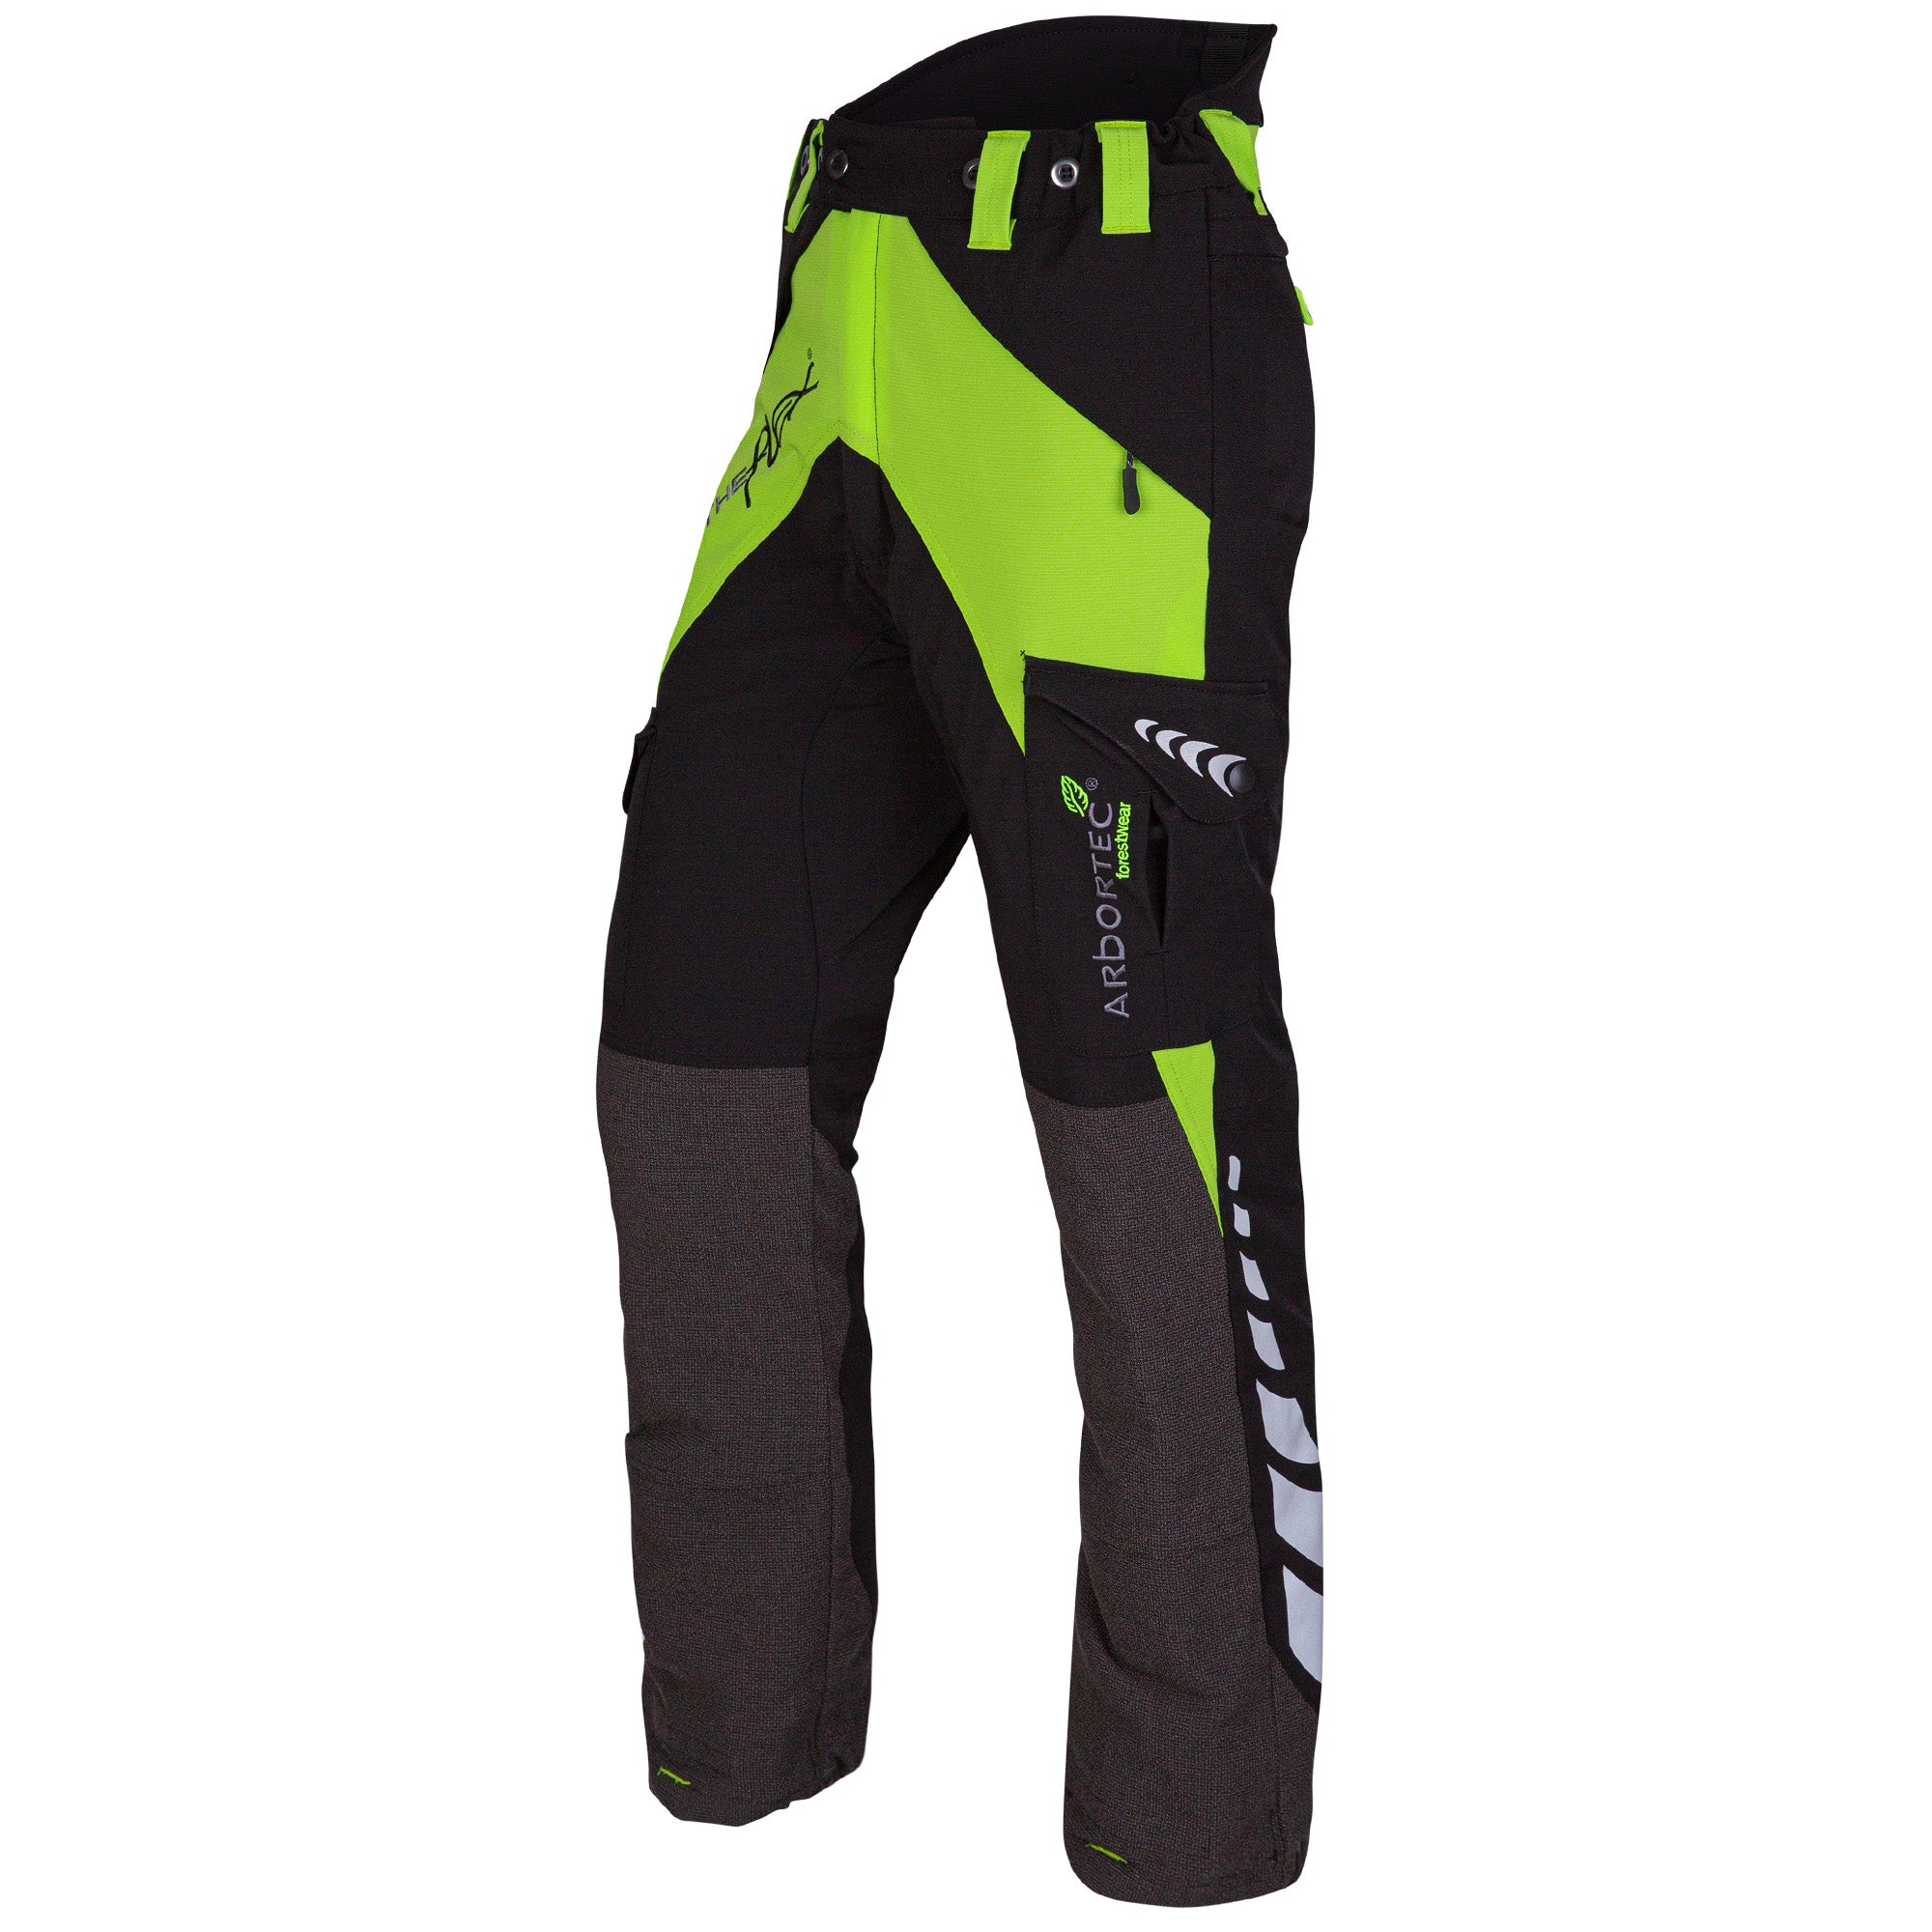 AT4010/AT4020/AT4030 Breatheflex Chainsaw Trousers Design A Class 1/2/3 - Lime.